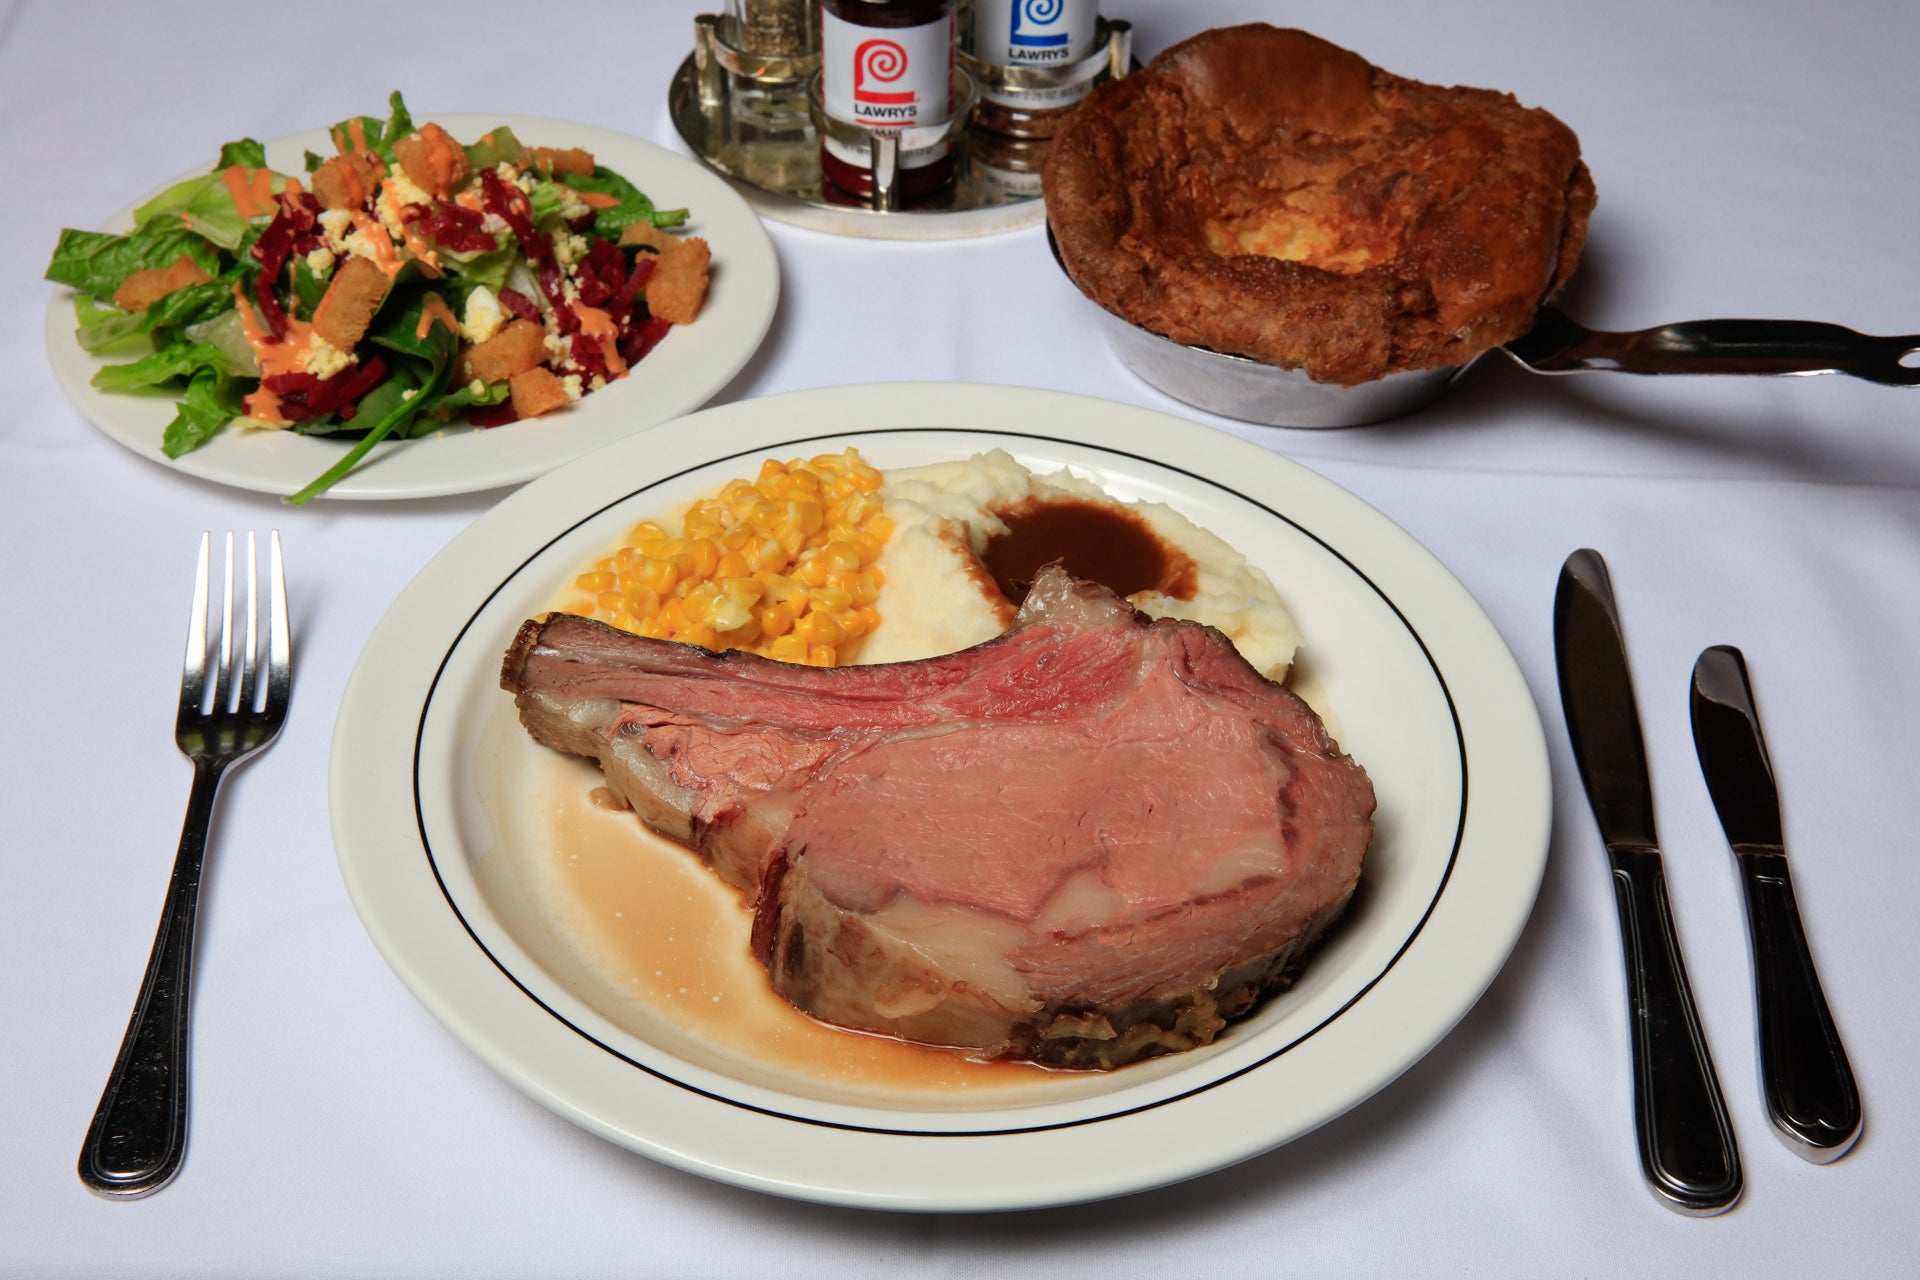 https://www.discoverlosangeles.com/sites/default/files/images/2019-04/Lawry%27s%20The%20Prime%20Rib%20mashed%20potatoes%20creamed%20corn.jpg